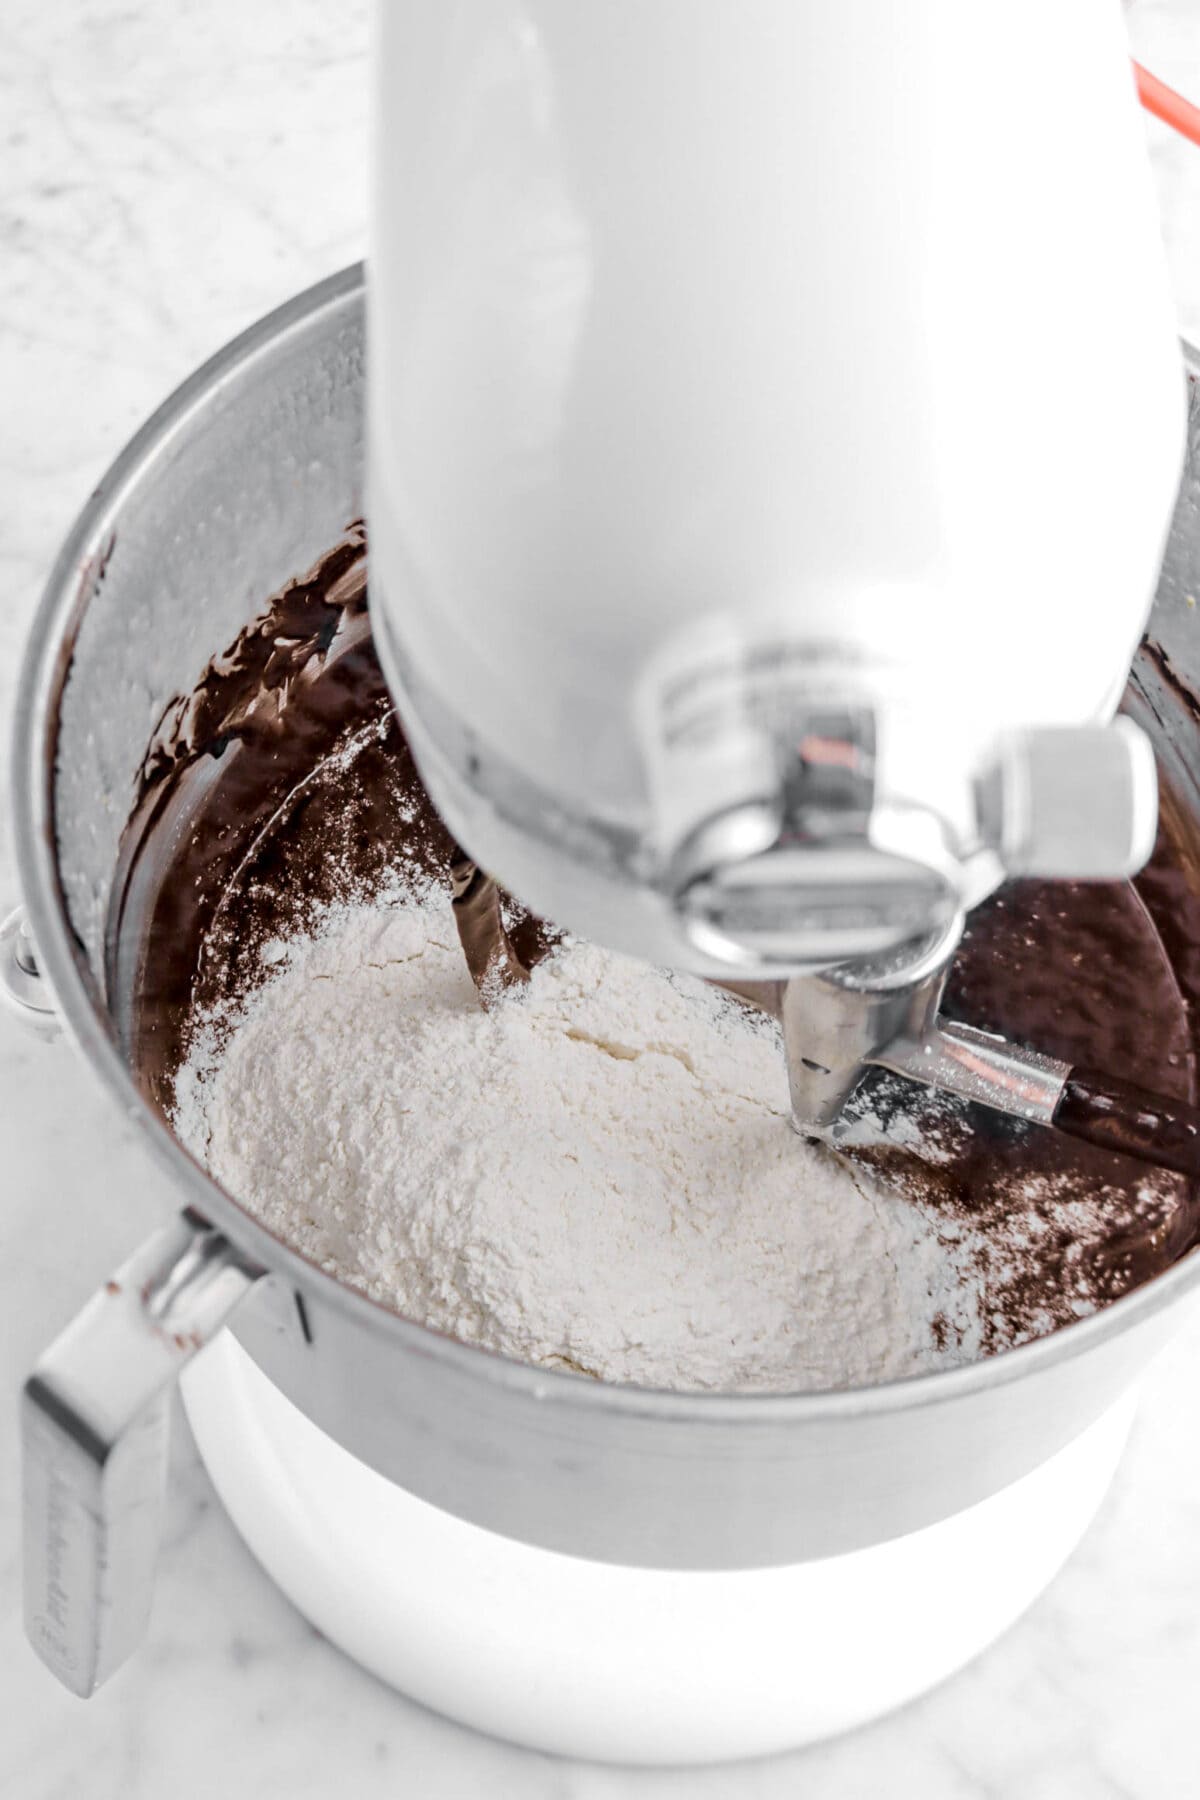 flour added to chocolate mixture in stand mixer.